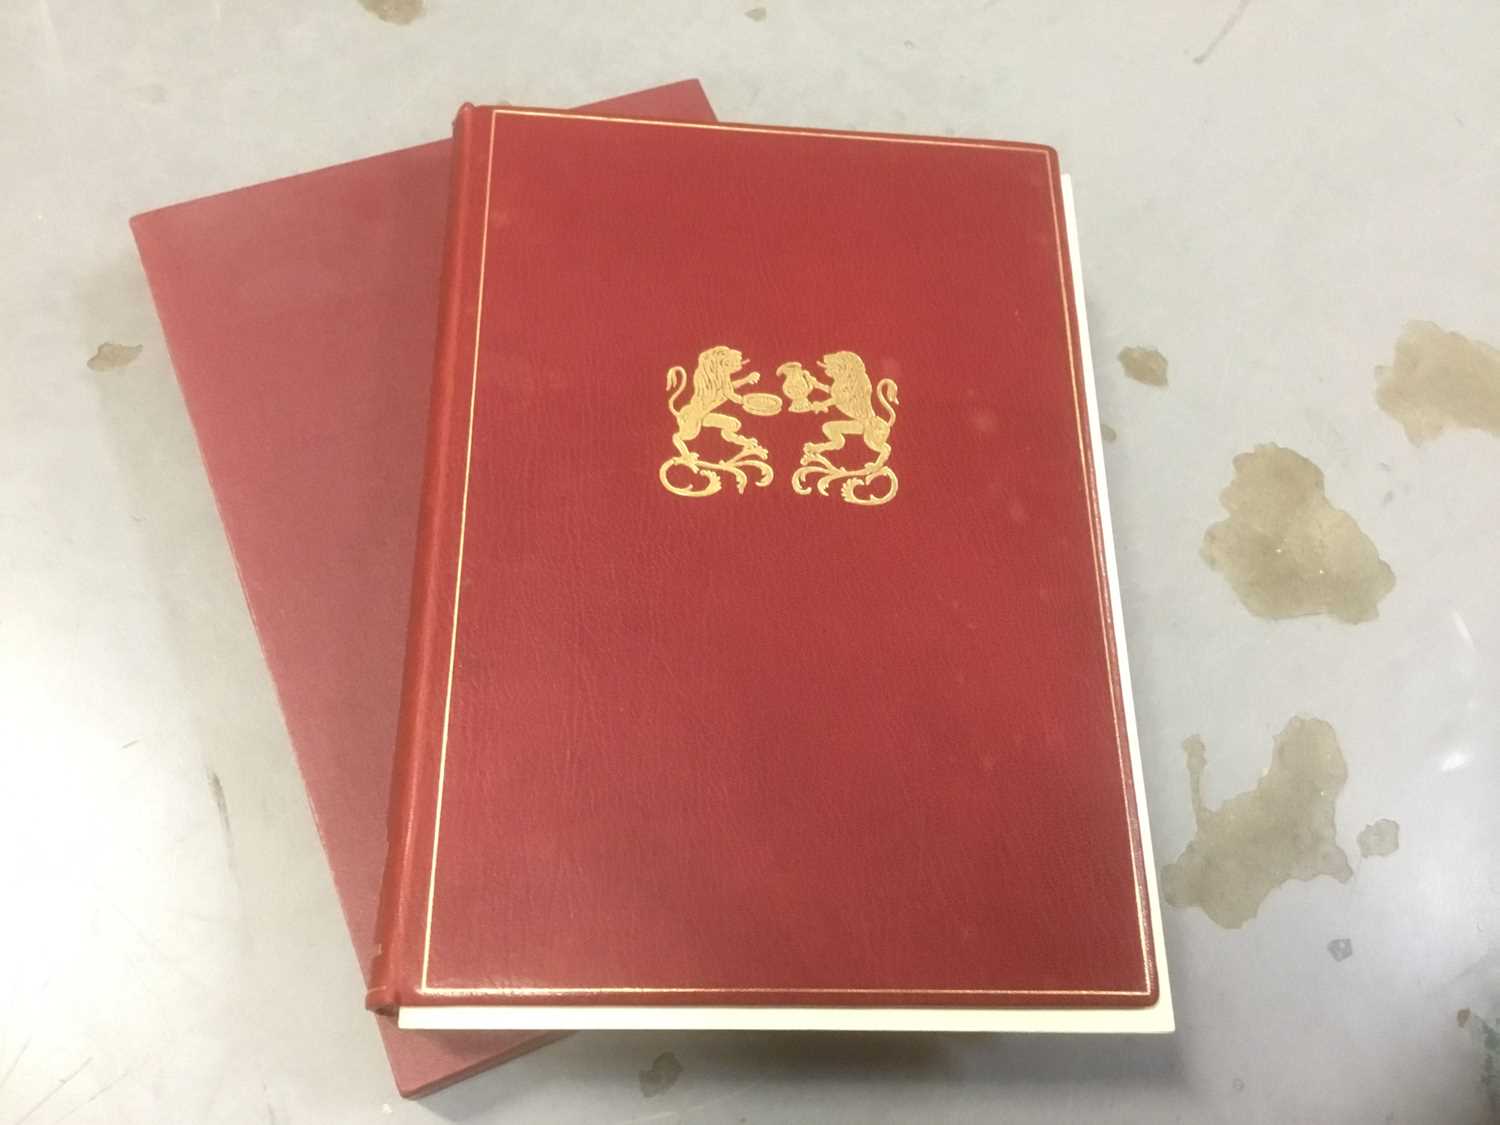 Lot 1739 - Alfred Rubens - Jewish iconography 1981 limited revised edition, numbered 264 of 650 copies. De lux binding in slip case (1 book)